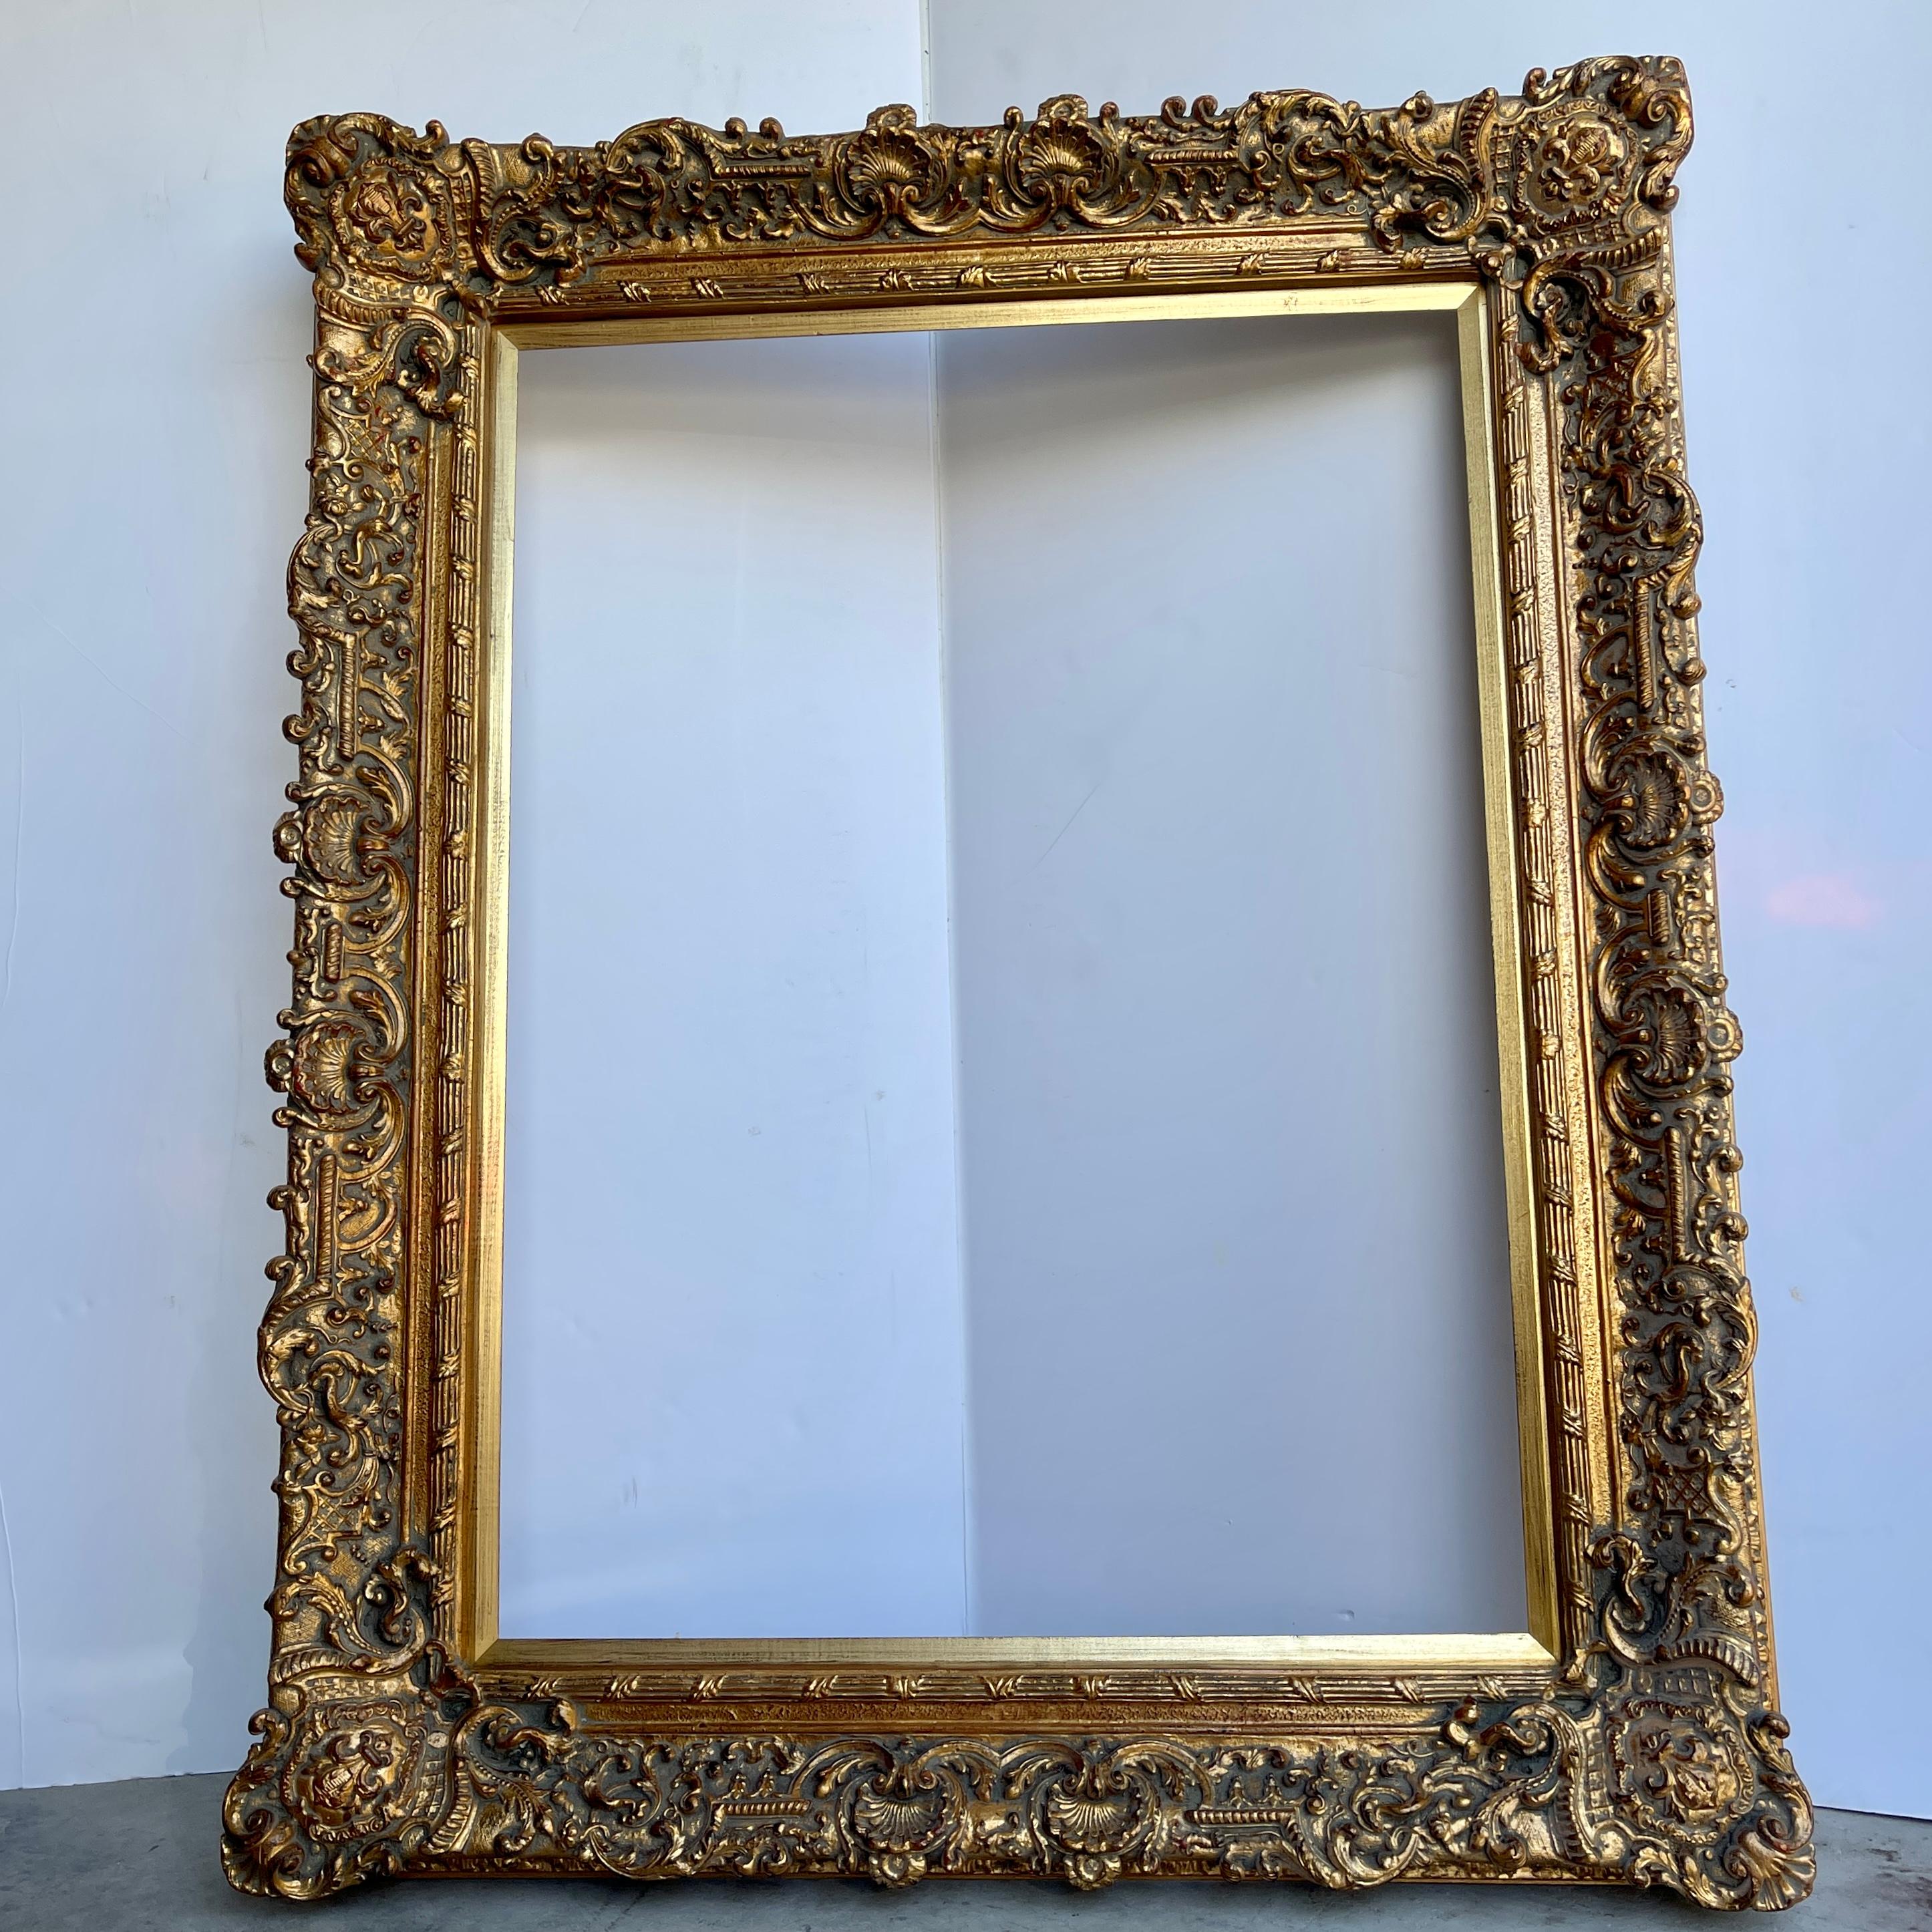 20th Century Large Ornate Carved Gilt Wood Frame, French Rococo Style  For Sale 2